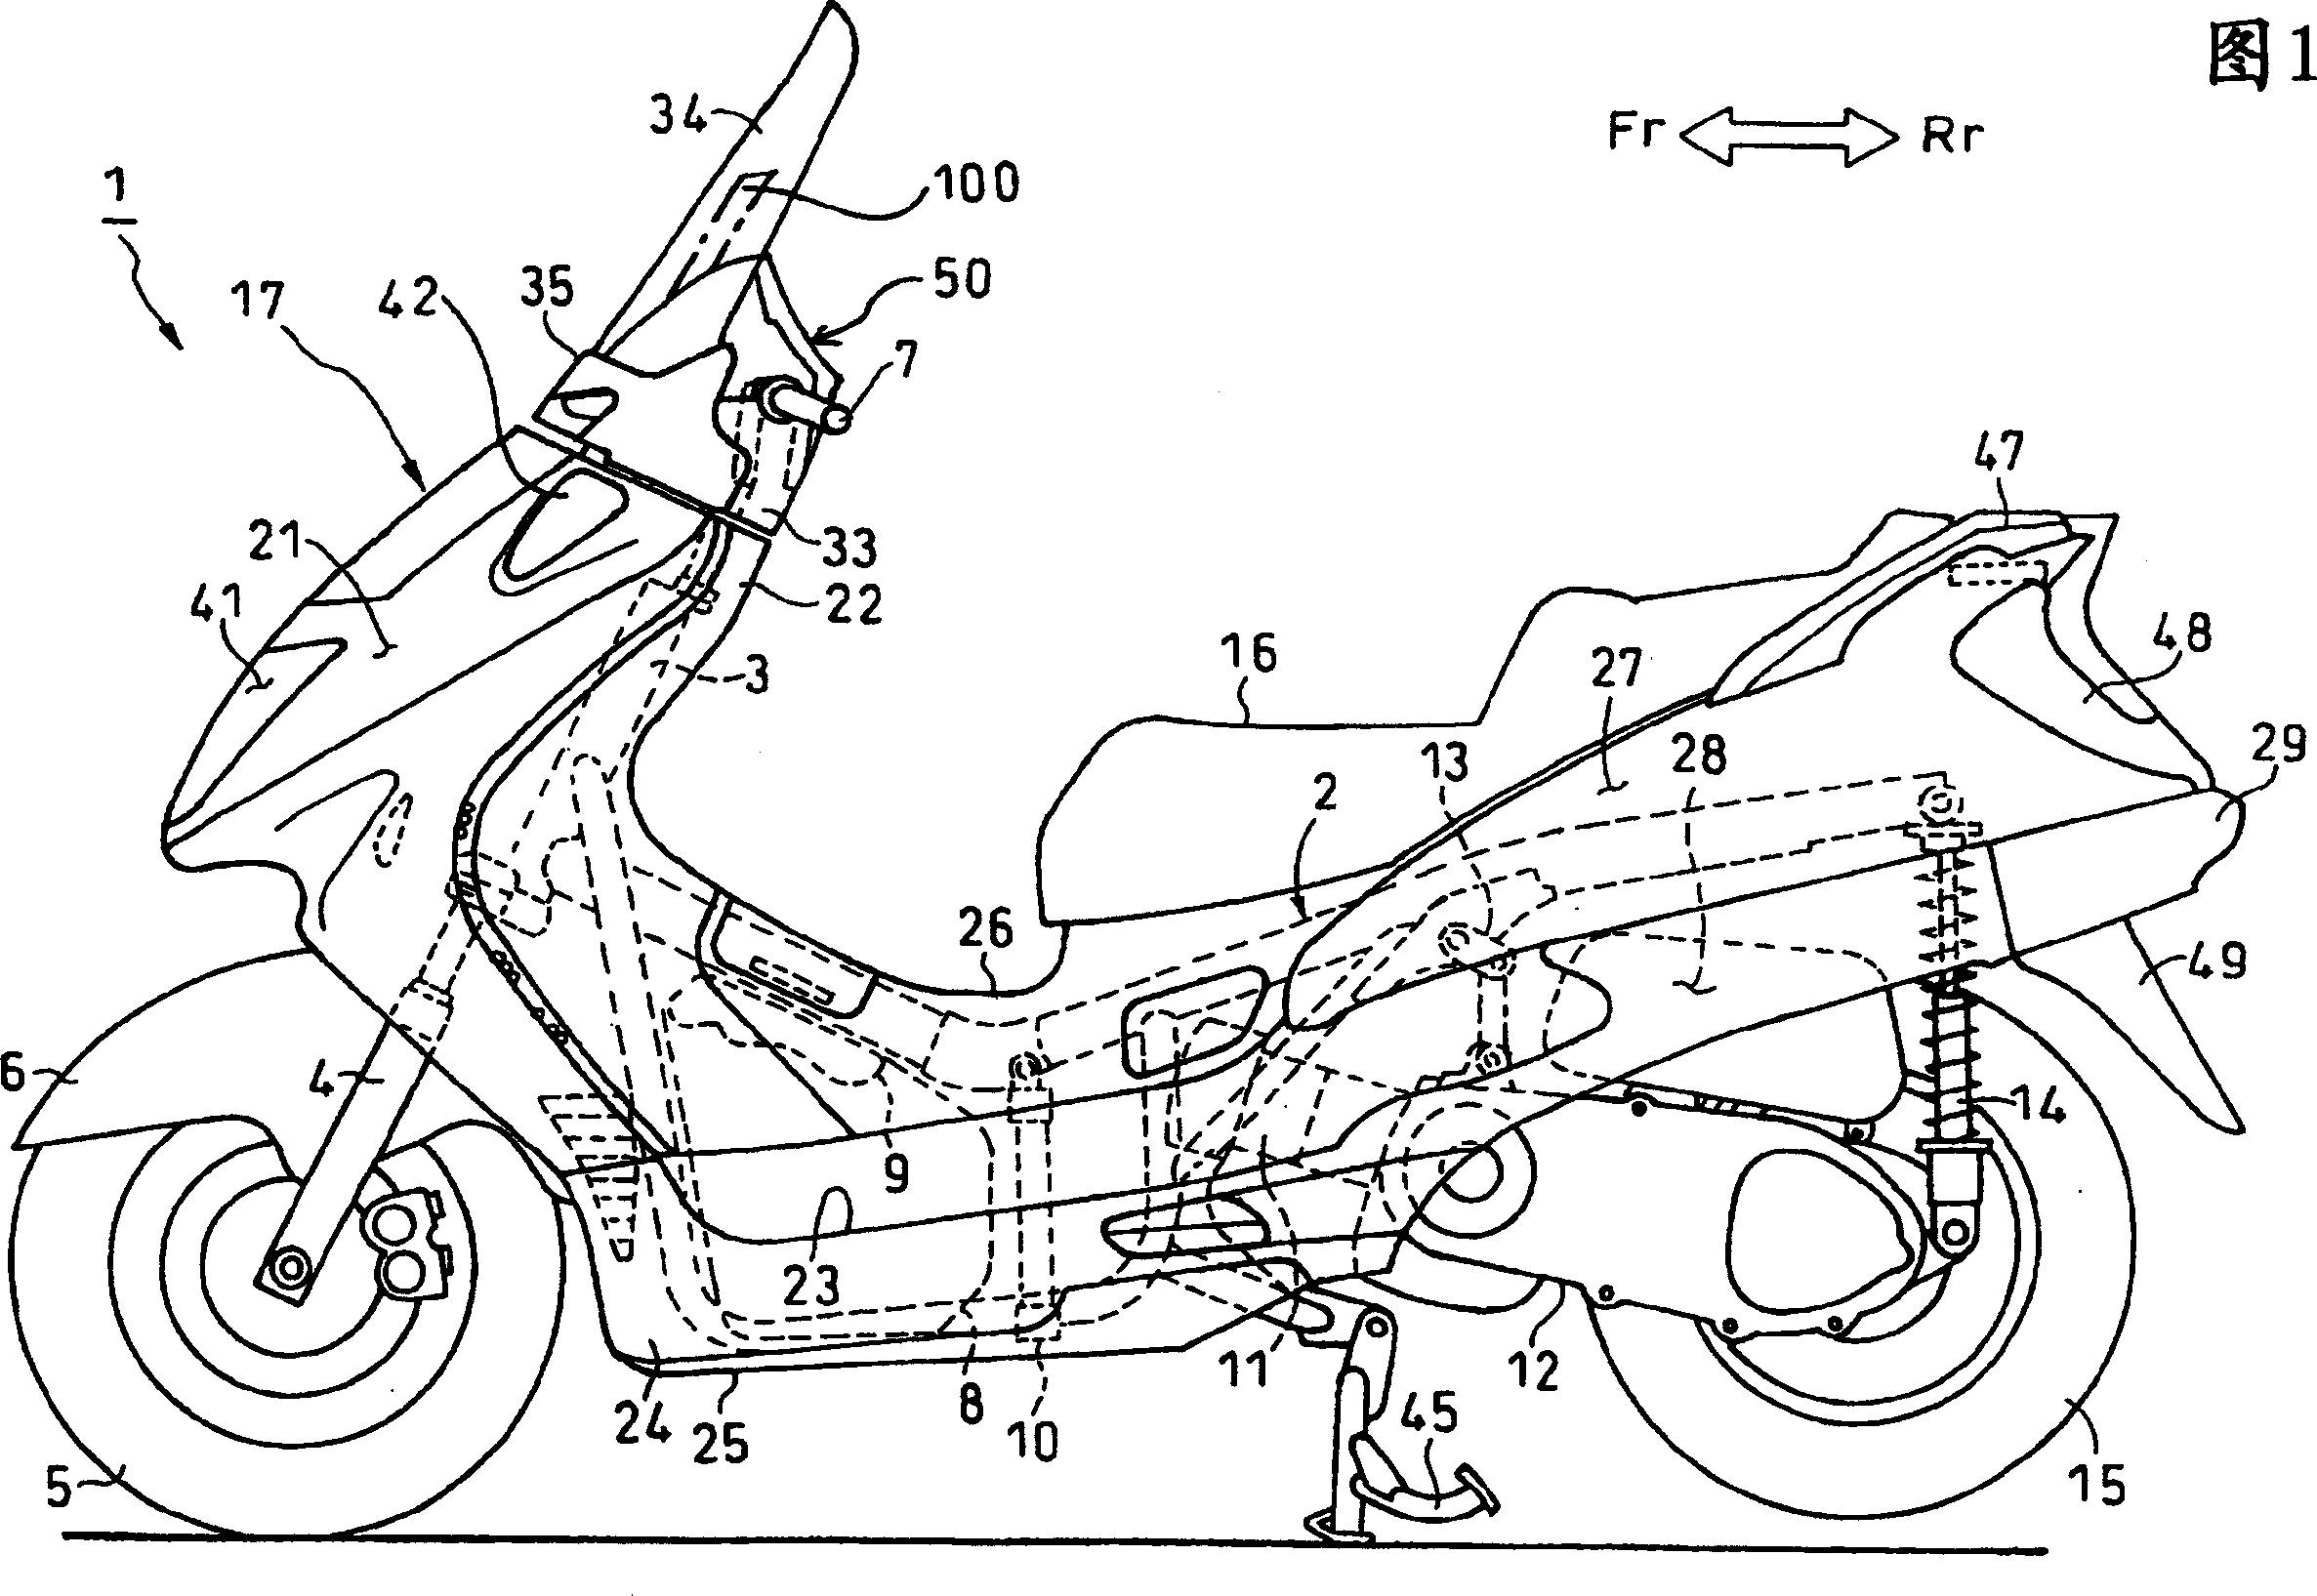 Display device for the vehicle and its ray guiding plate